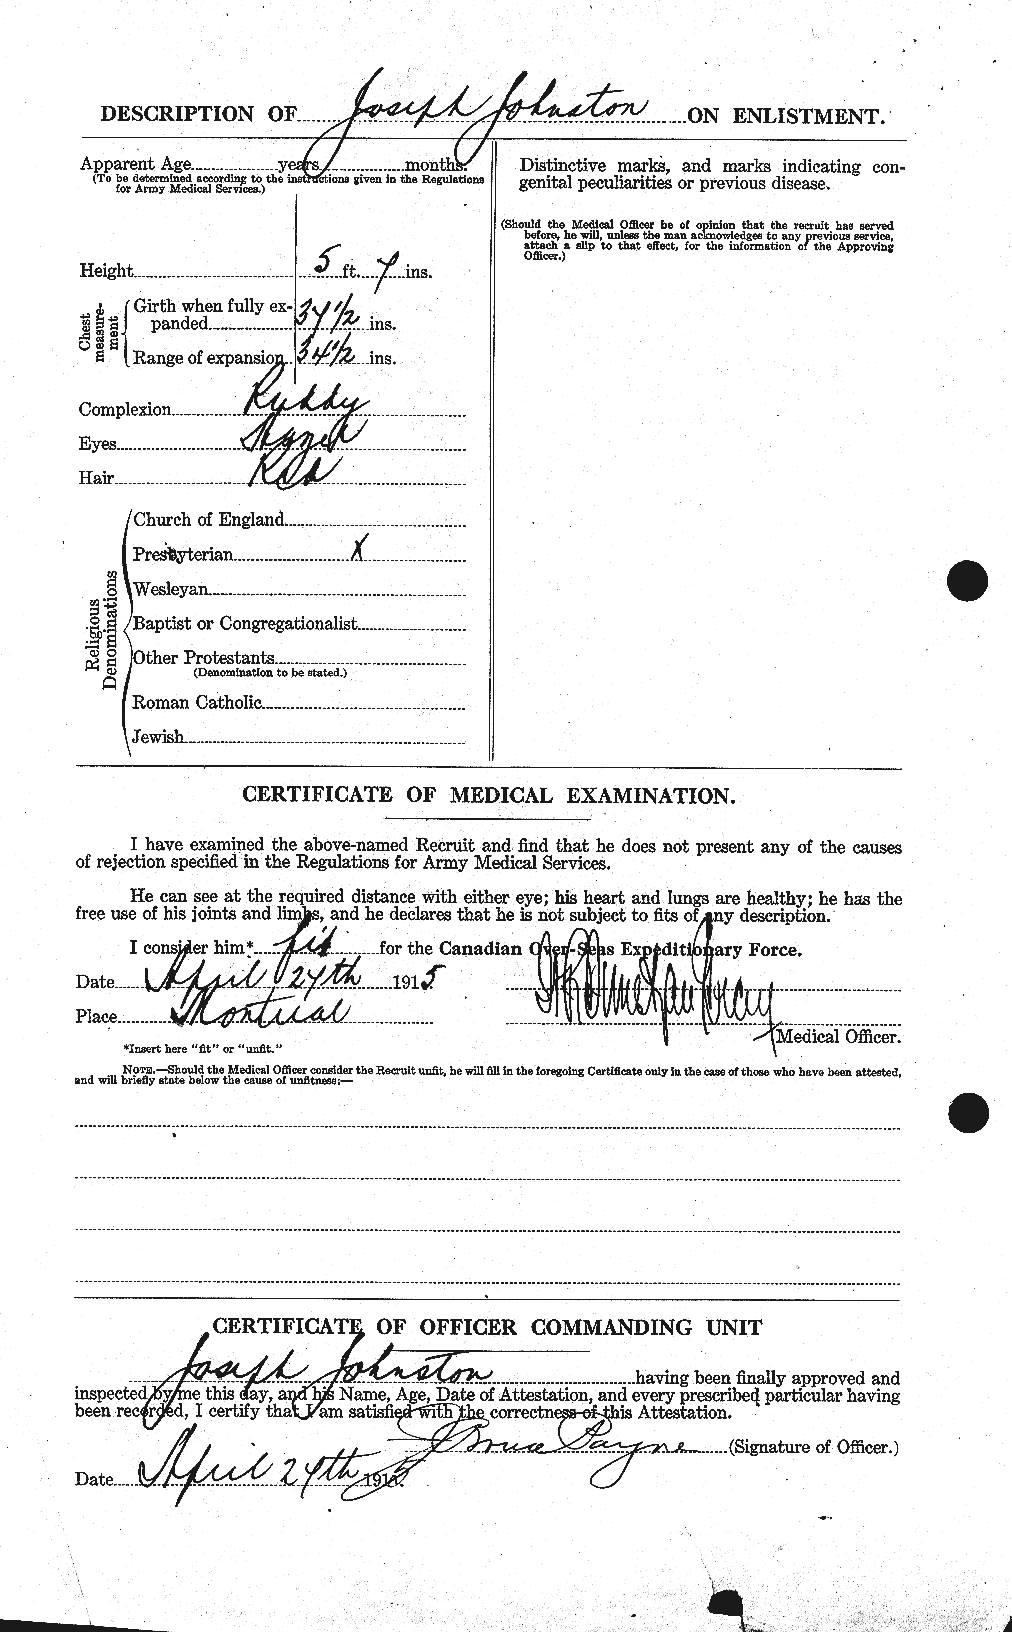 Personnel Records of the First World War - CEF 422896b